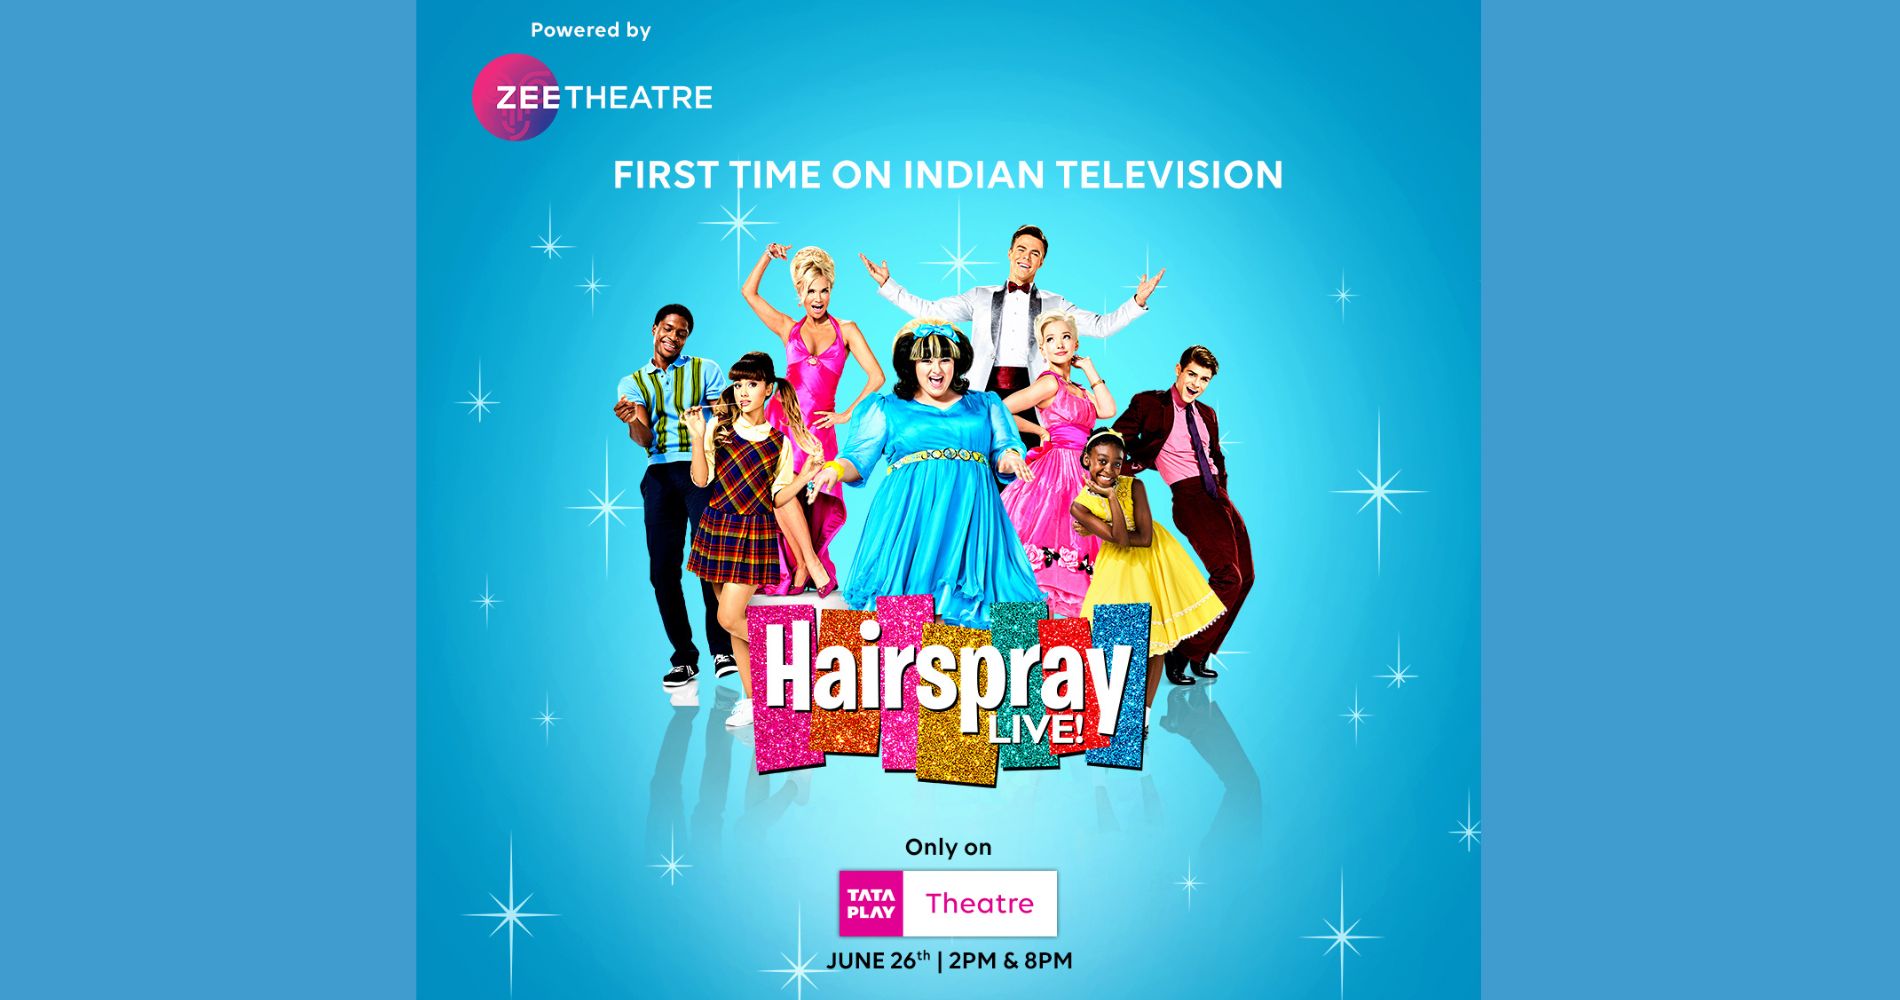 Zee Theatre brings 'Hairspray Live!', Much loved Emmy-winning musical to